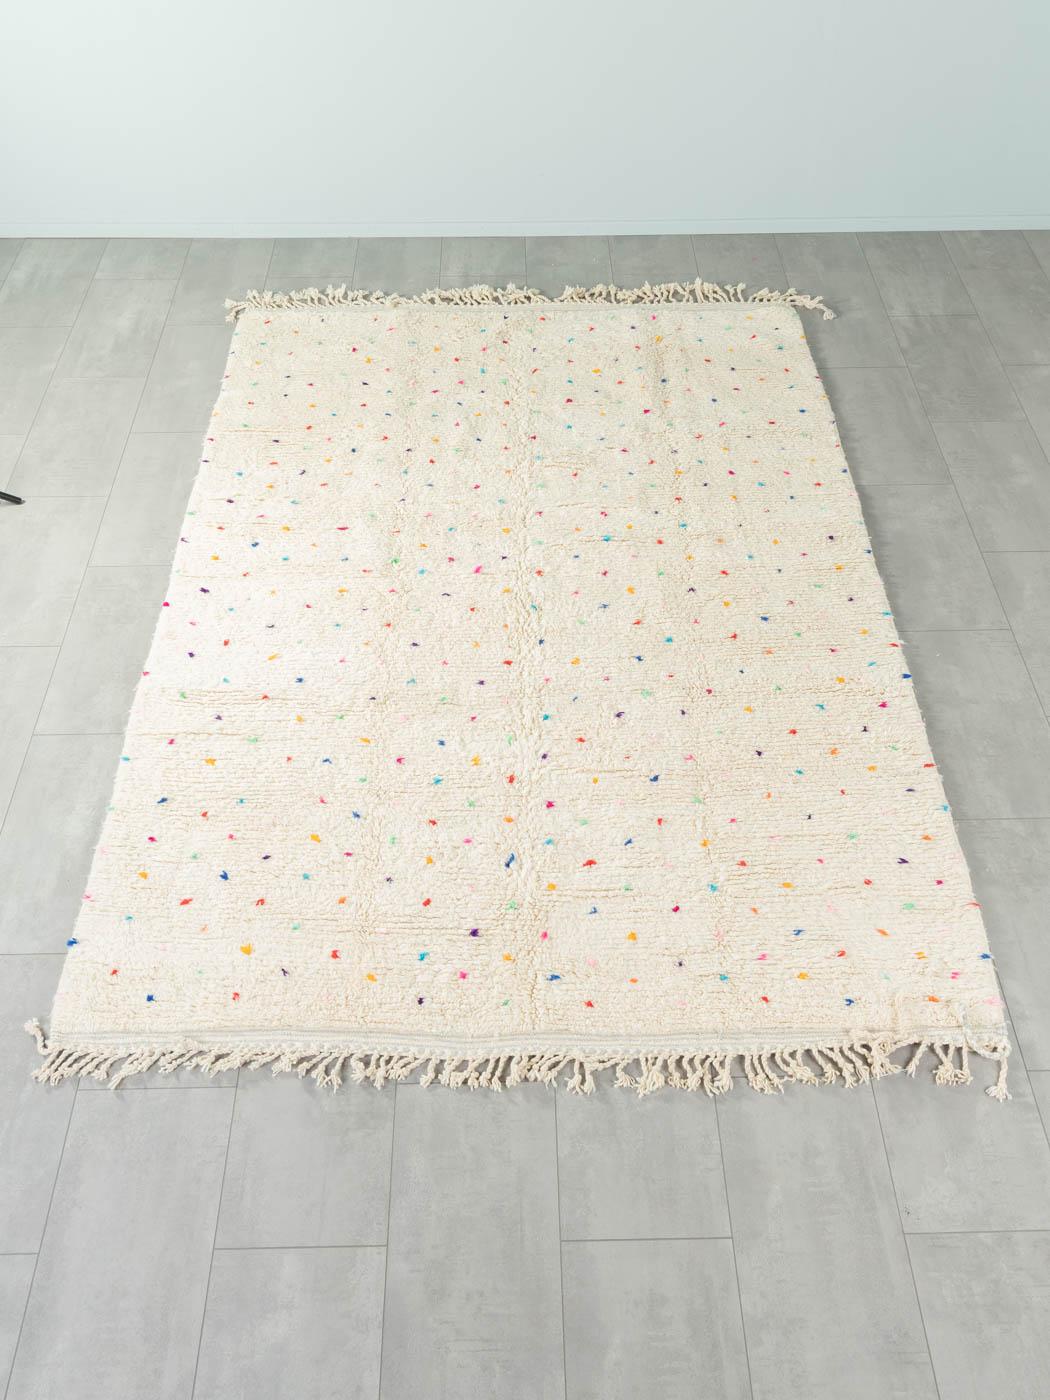 Polka Dots is a contemporary 100% wool rug – thick and soft, comfortable underfoot. Our Berber rugs are handwoven and handknotted by Amazigh women in the Atlas Mountains. These communities have been crafting rugs for thousands of years. One knot at